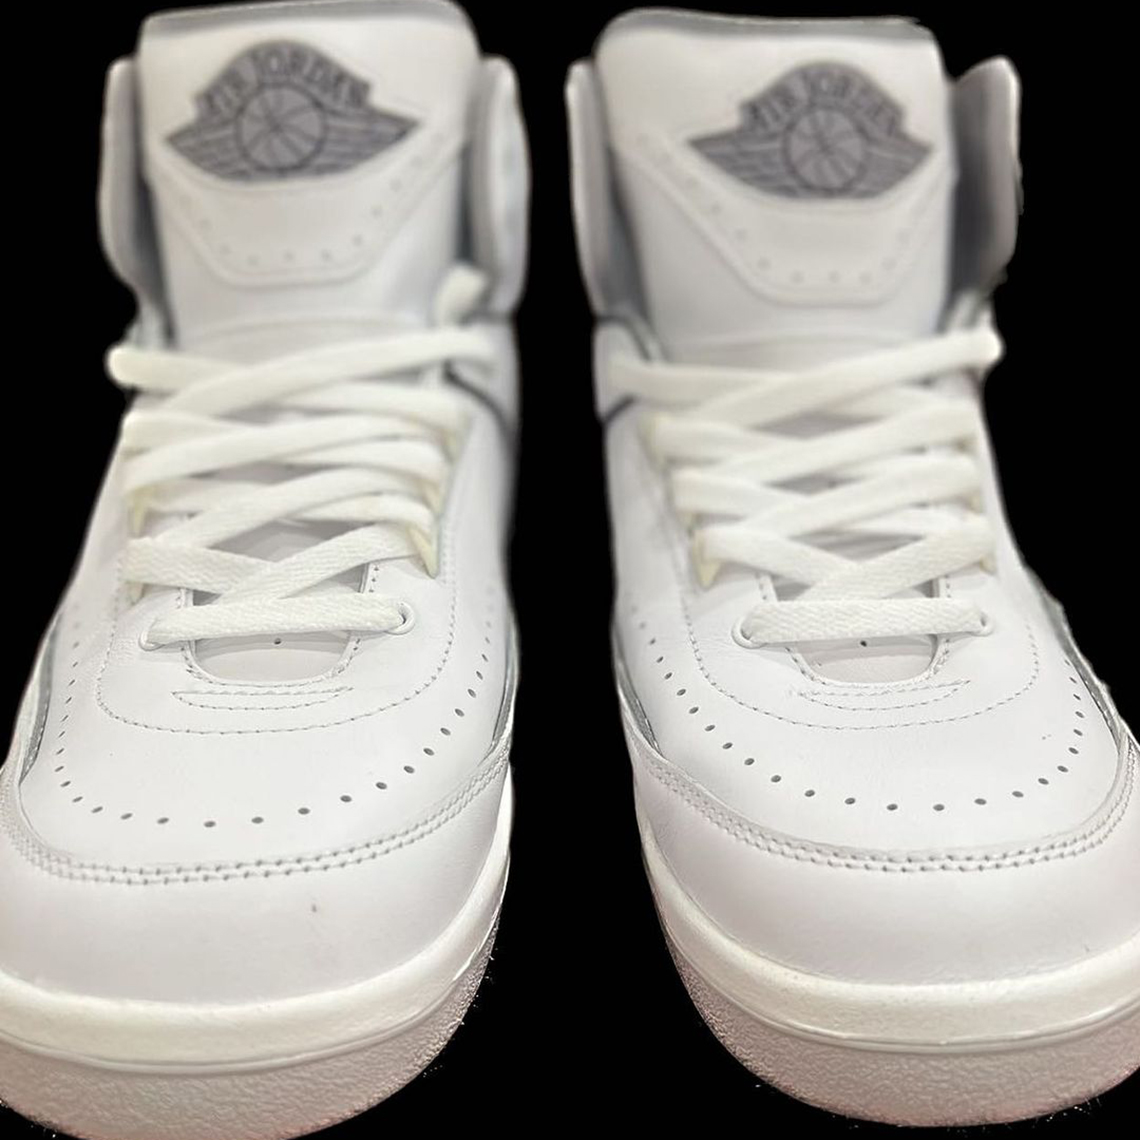 Close-Ups of the Air Jordan 1 High OG Reimagined White Cement Grey Dr8884 100 7